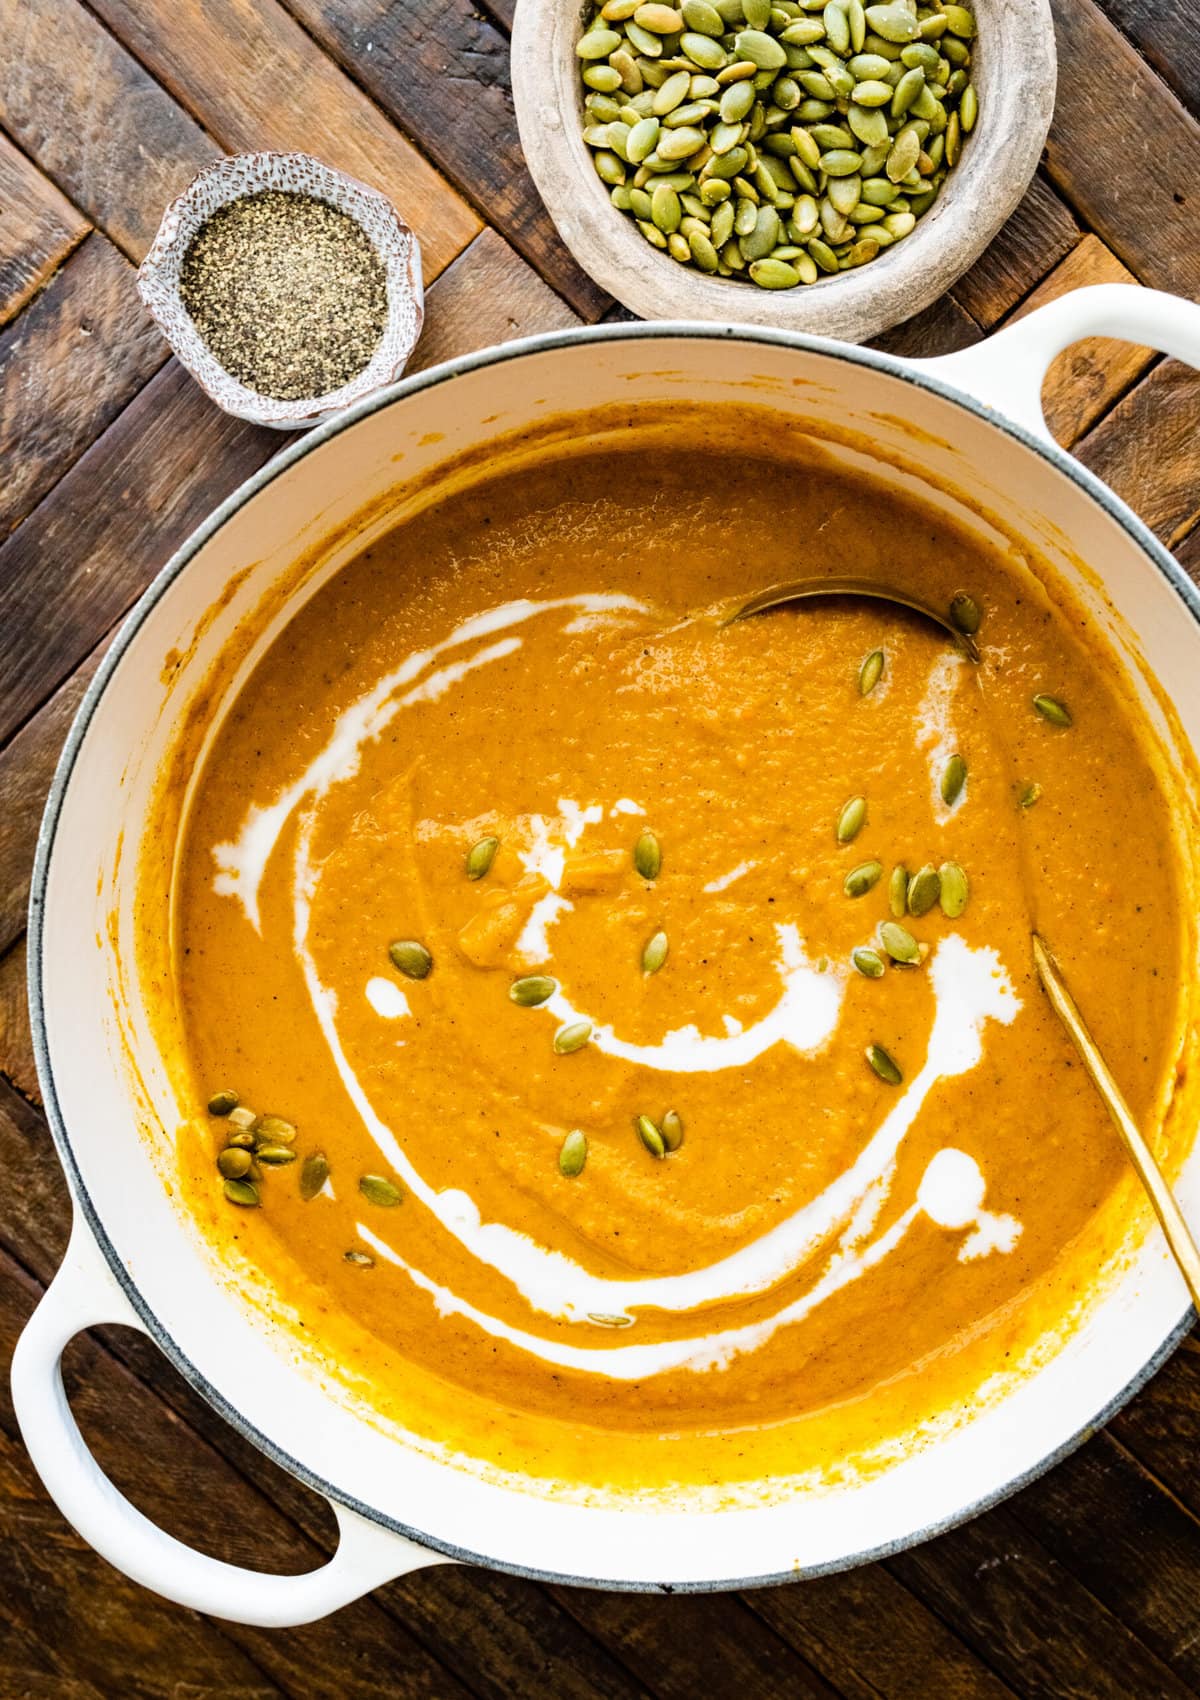 How to make Copycat Panera Autumn Squash Soup Recipe Step by Step Photos- blended soup in pot with swirl of cream and pumpkin seeds. Ladle in pot of soup.